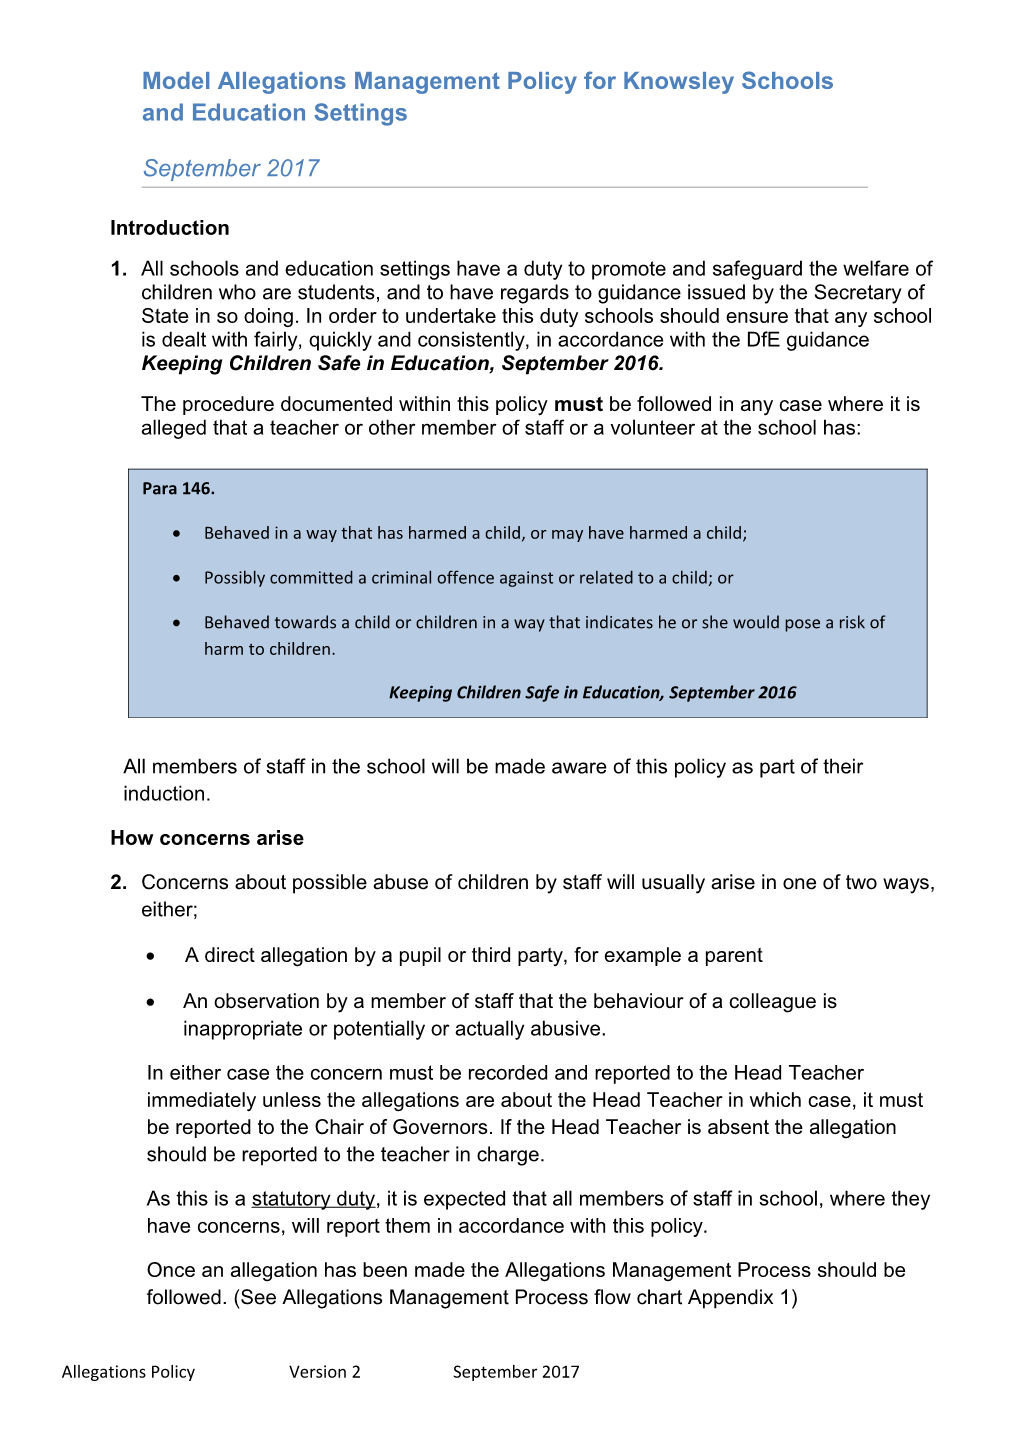 Model Allegations Management Policy for Knowsley Schools and Education Settings